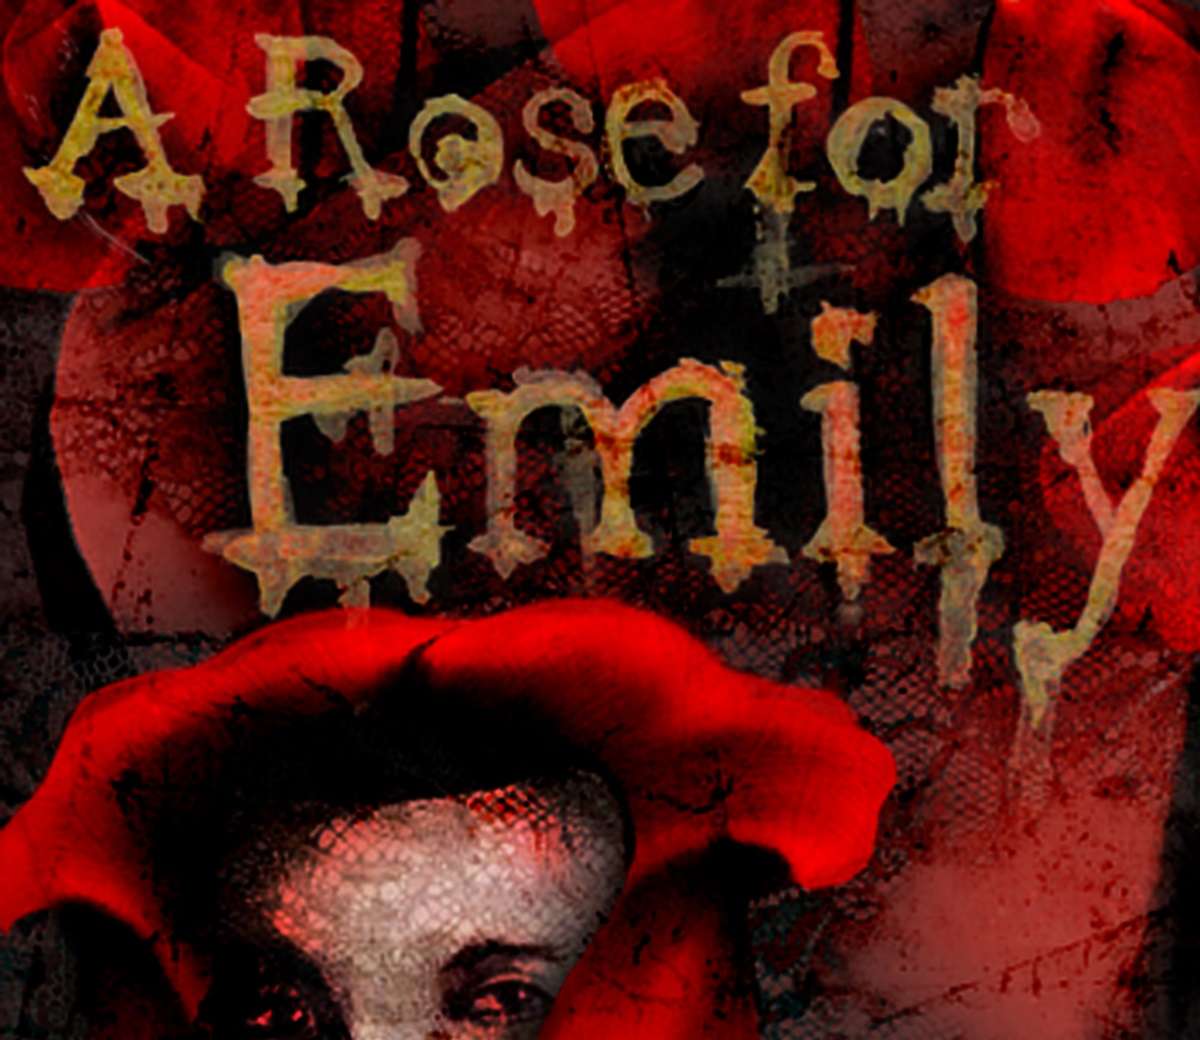 A Rose for Emily by William Faulkner